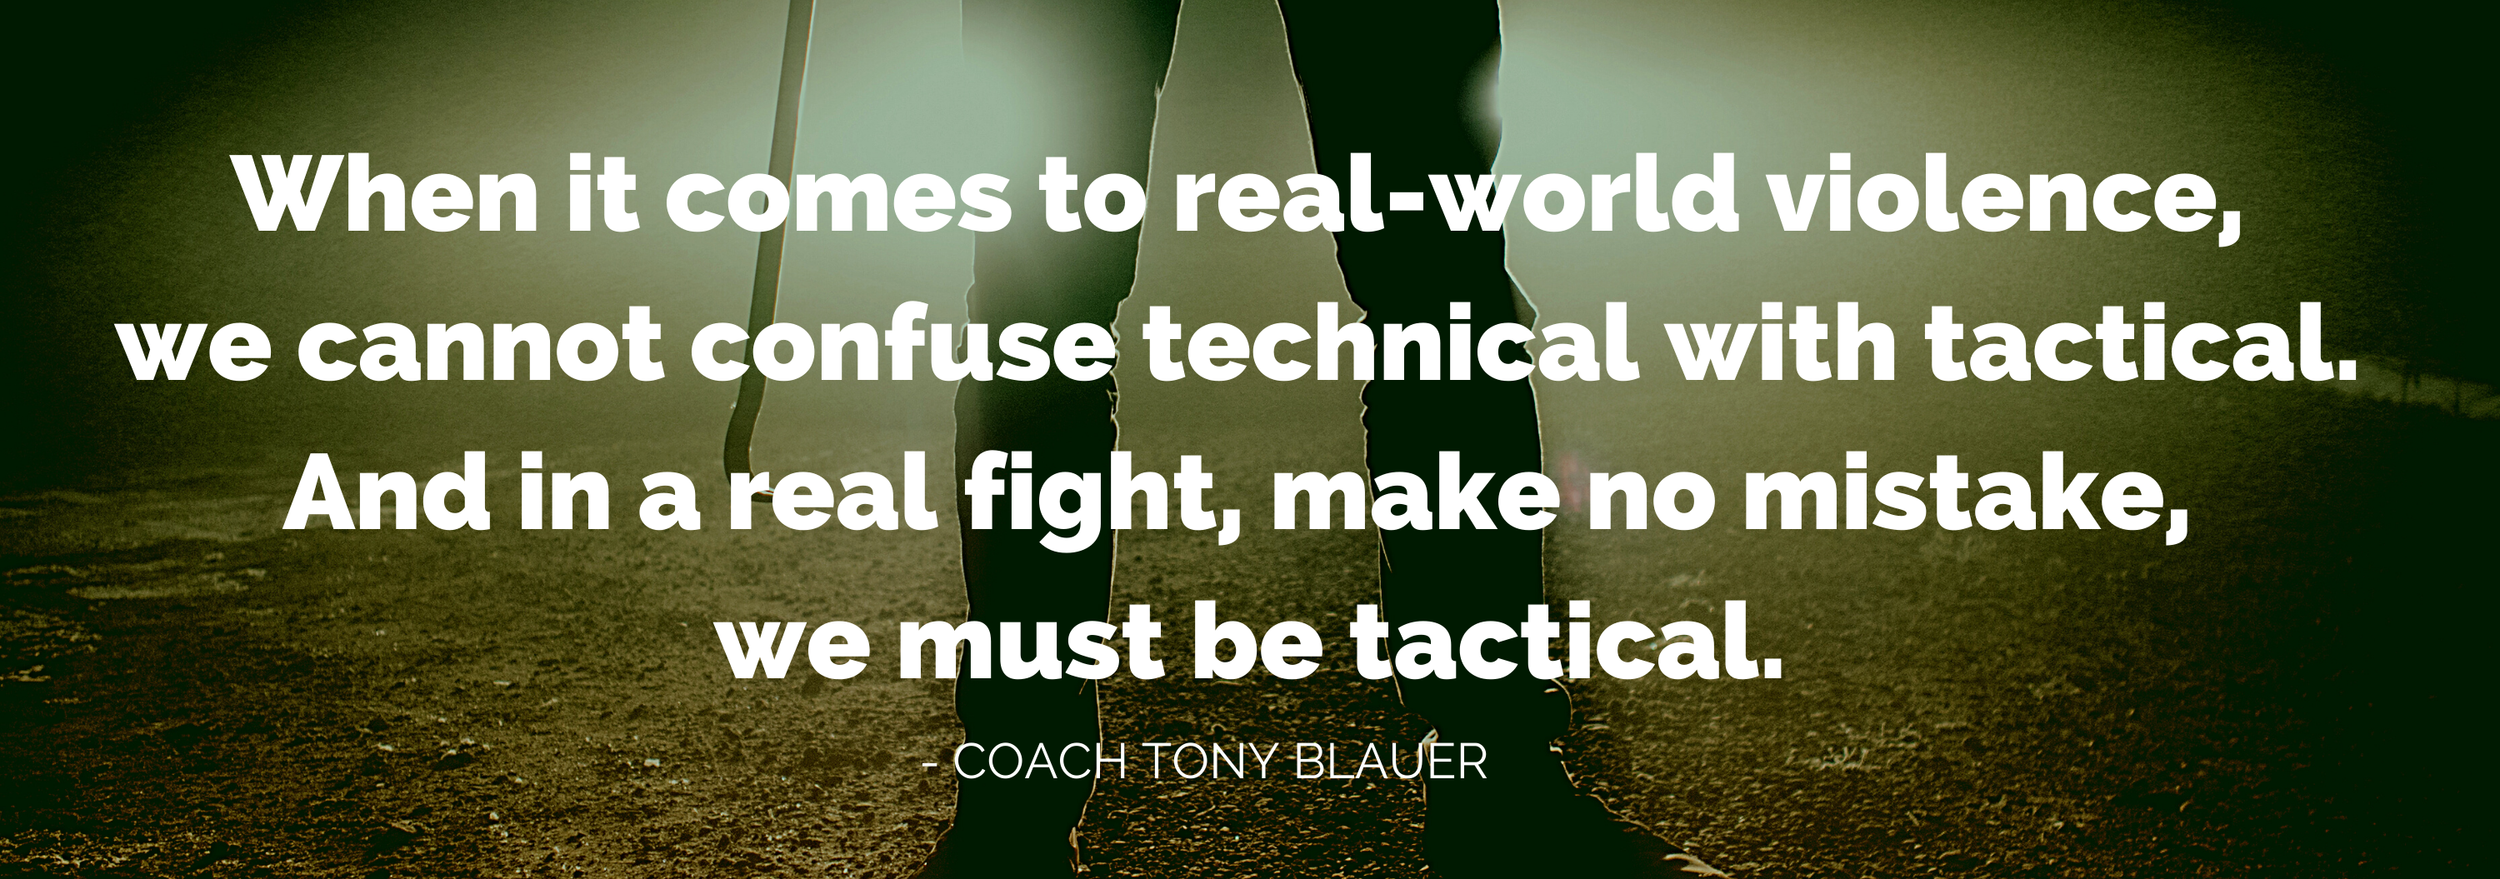 When it comes to real-world violence, we cannot confuse technical with tactical. And in a real fight, make no mistake, we must be tactical. (1).png